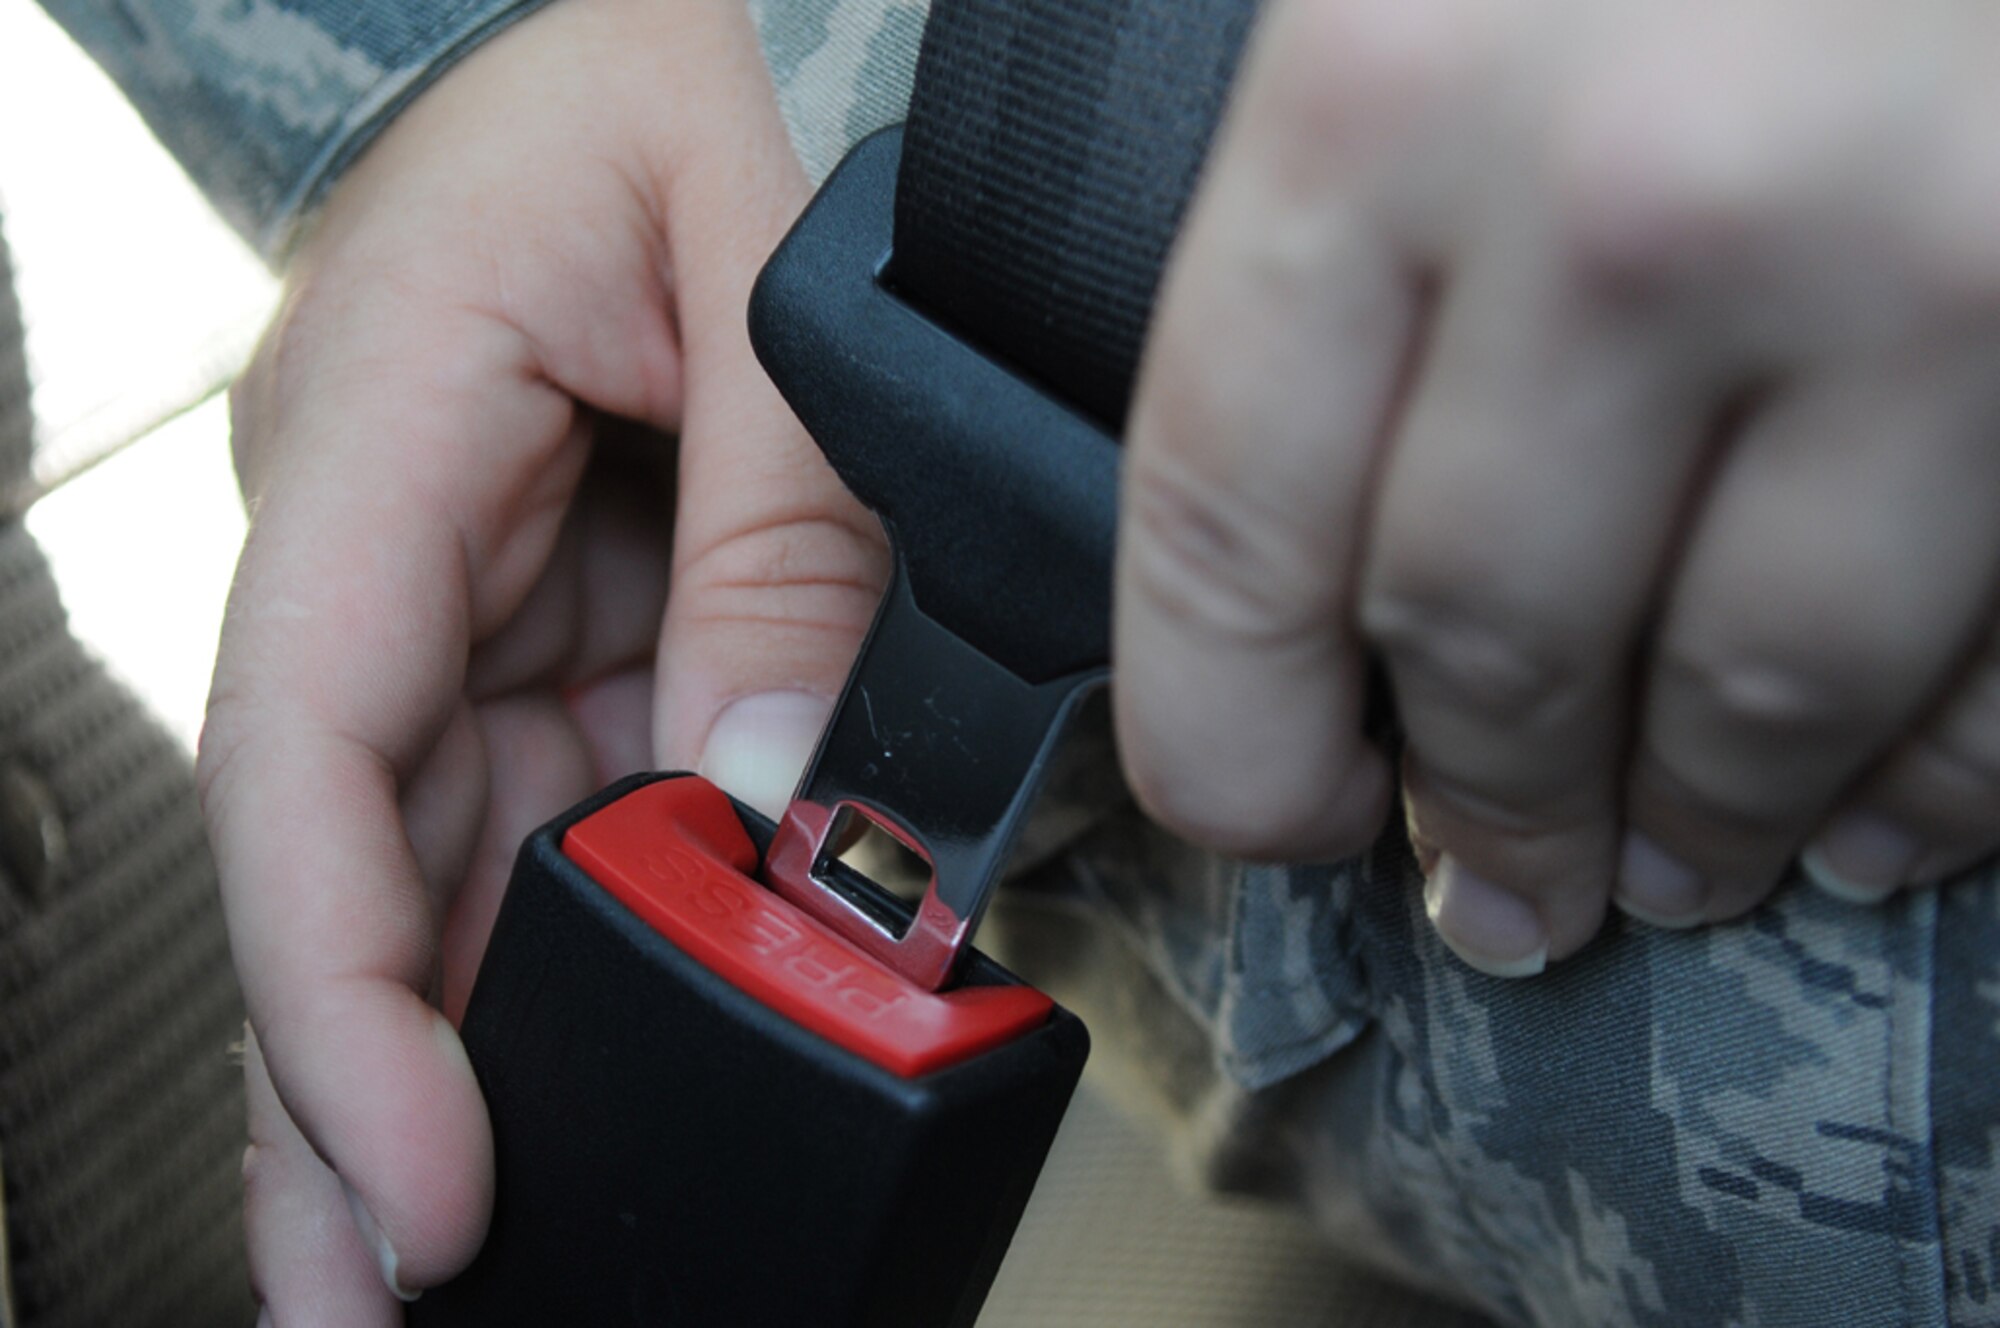 It is a tragic and chilling fact: the U.S. military loses the equivalent of a battalion of troops each year - not in combat, but in automobile accidents. Only 69% of the adult U.S. population consistently use a seatbelt. Don’t become a statistic.  Wear your seatbelt and make sure everyone in your vehicle does too. (U.S. Air Force photo by Senior Airman Chris Ruano)